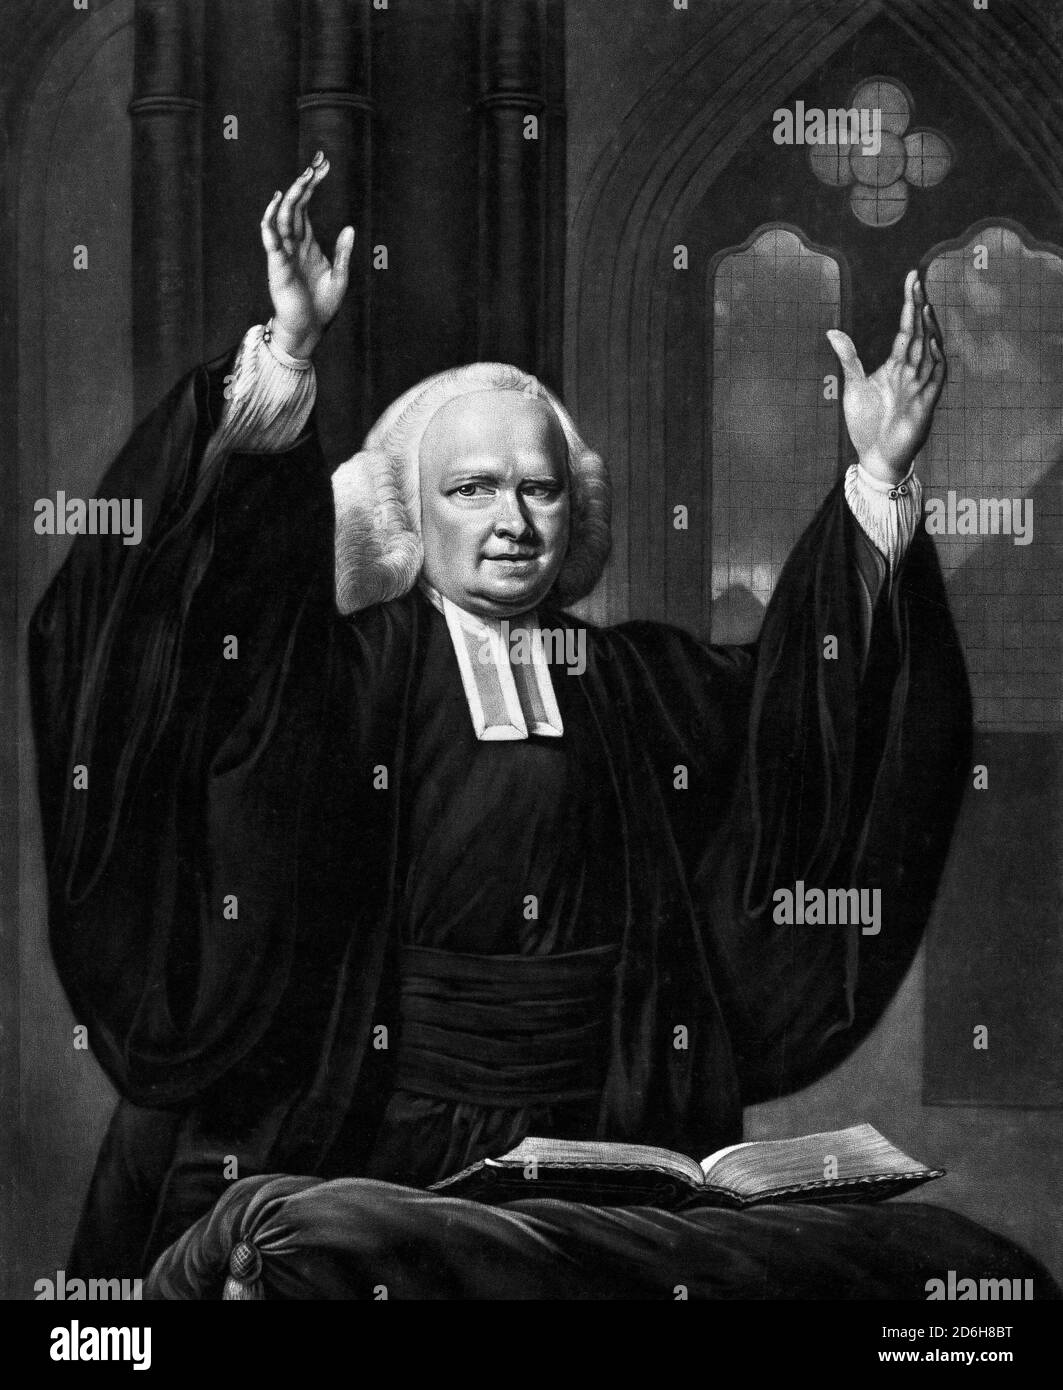 George Whitefield. Portrait of the English Anglican cleric, Reverend George Whitefield (1714-1770) preaching, print by John Greenwood, after Nathaniel Hone, c.1759-1770. Whitefield was one of the founders of Methodism and the evangelical movement. Stock Photo